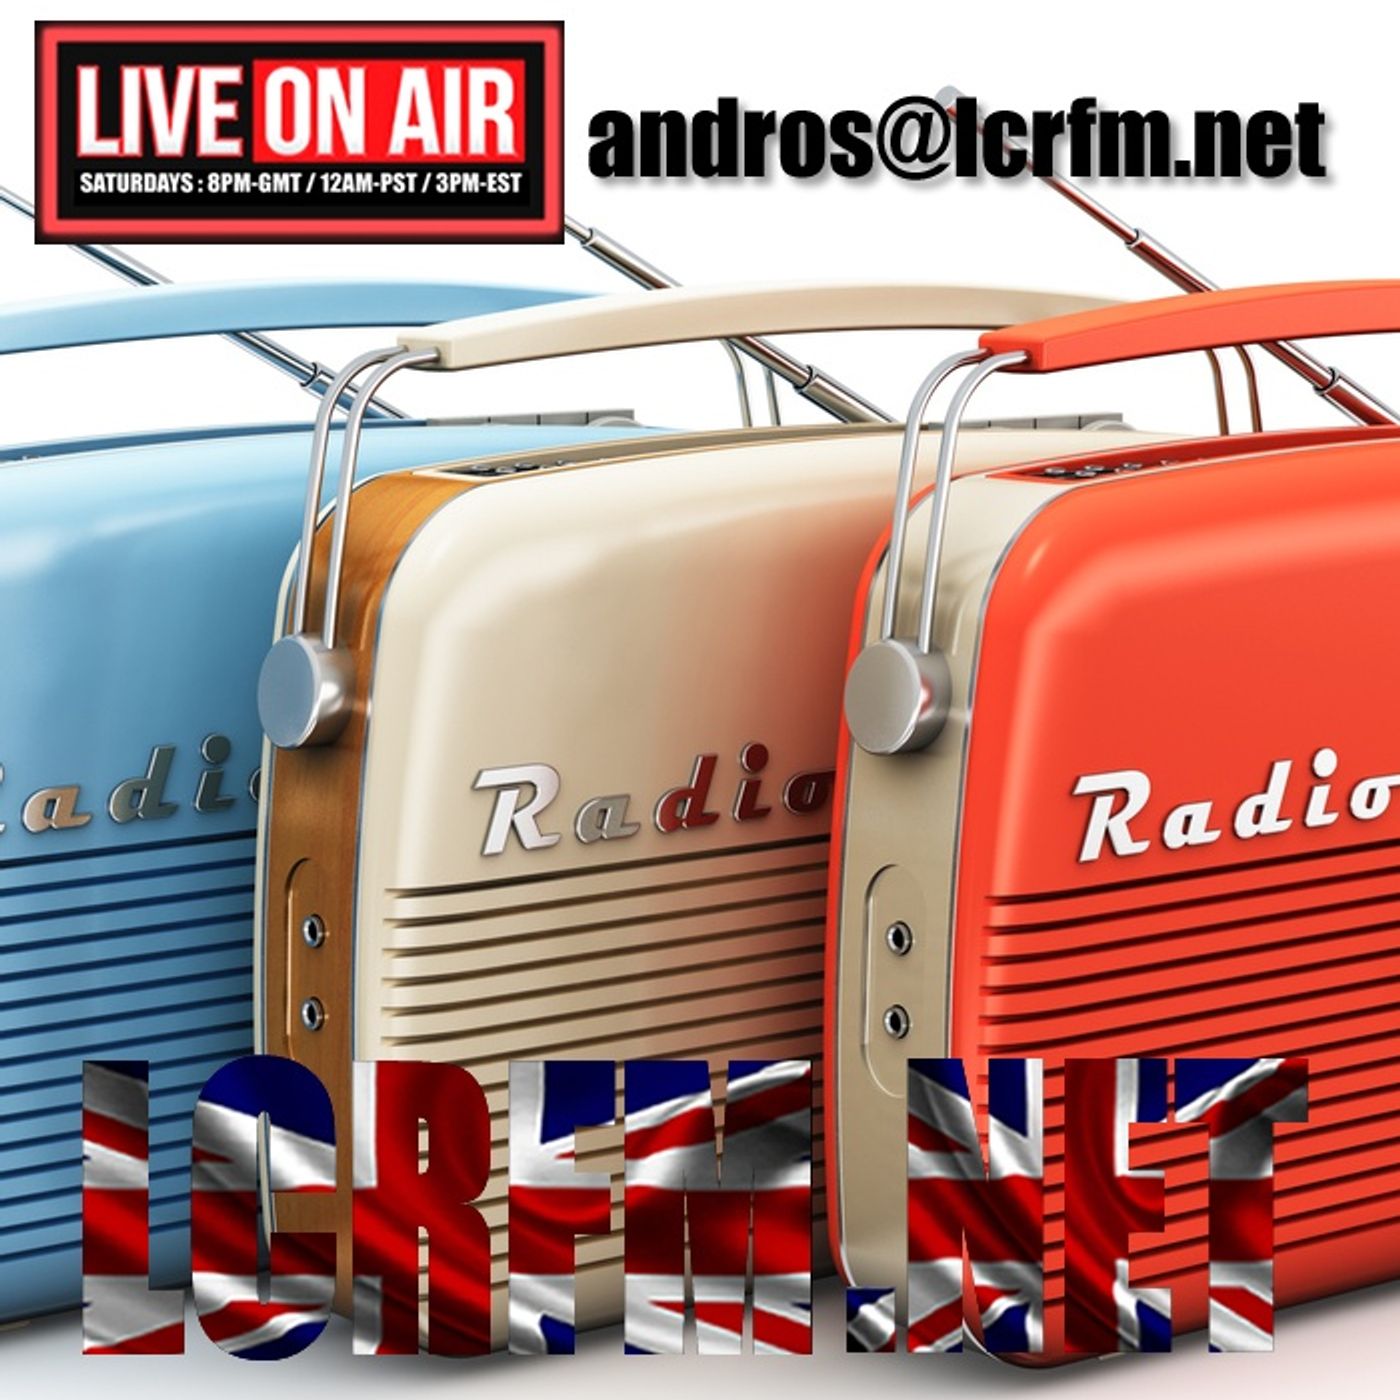 "ON AIR"... Saturday NOVEMBER 12TH … on LCRFM …LIVE FROM LONDON" LCRFM - The London Calling Radio Show on androsgeorgiou com... or lcrfm net